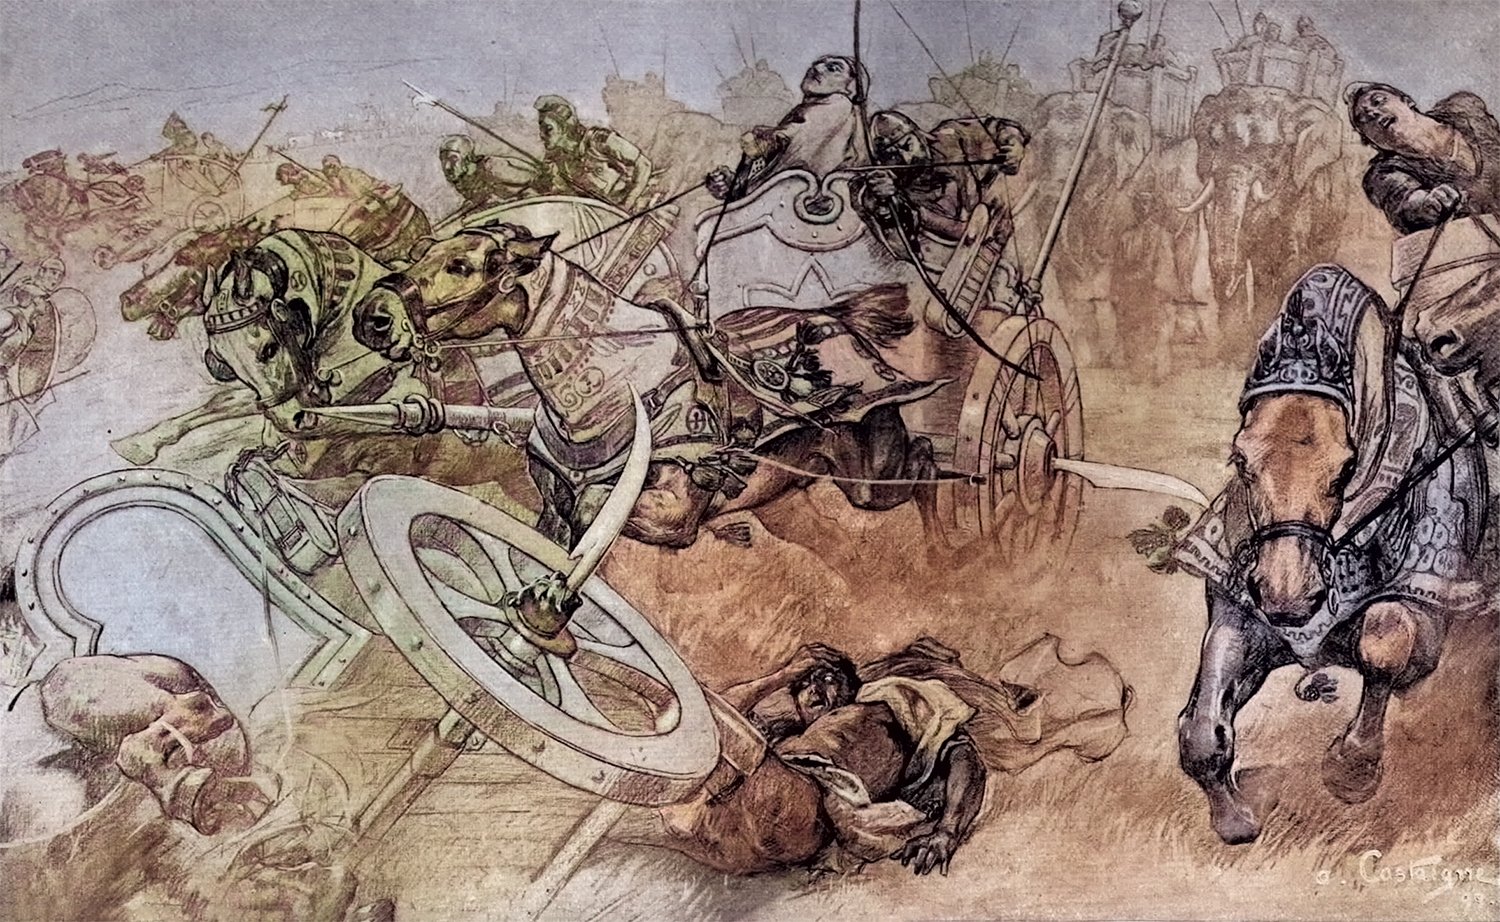 An illustration showing Persian scythed chariots in full charge during battle, with horses adorned in elaborate armor, charioteers wielding weapons, and fallen enemies on the ground.